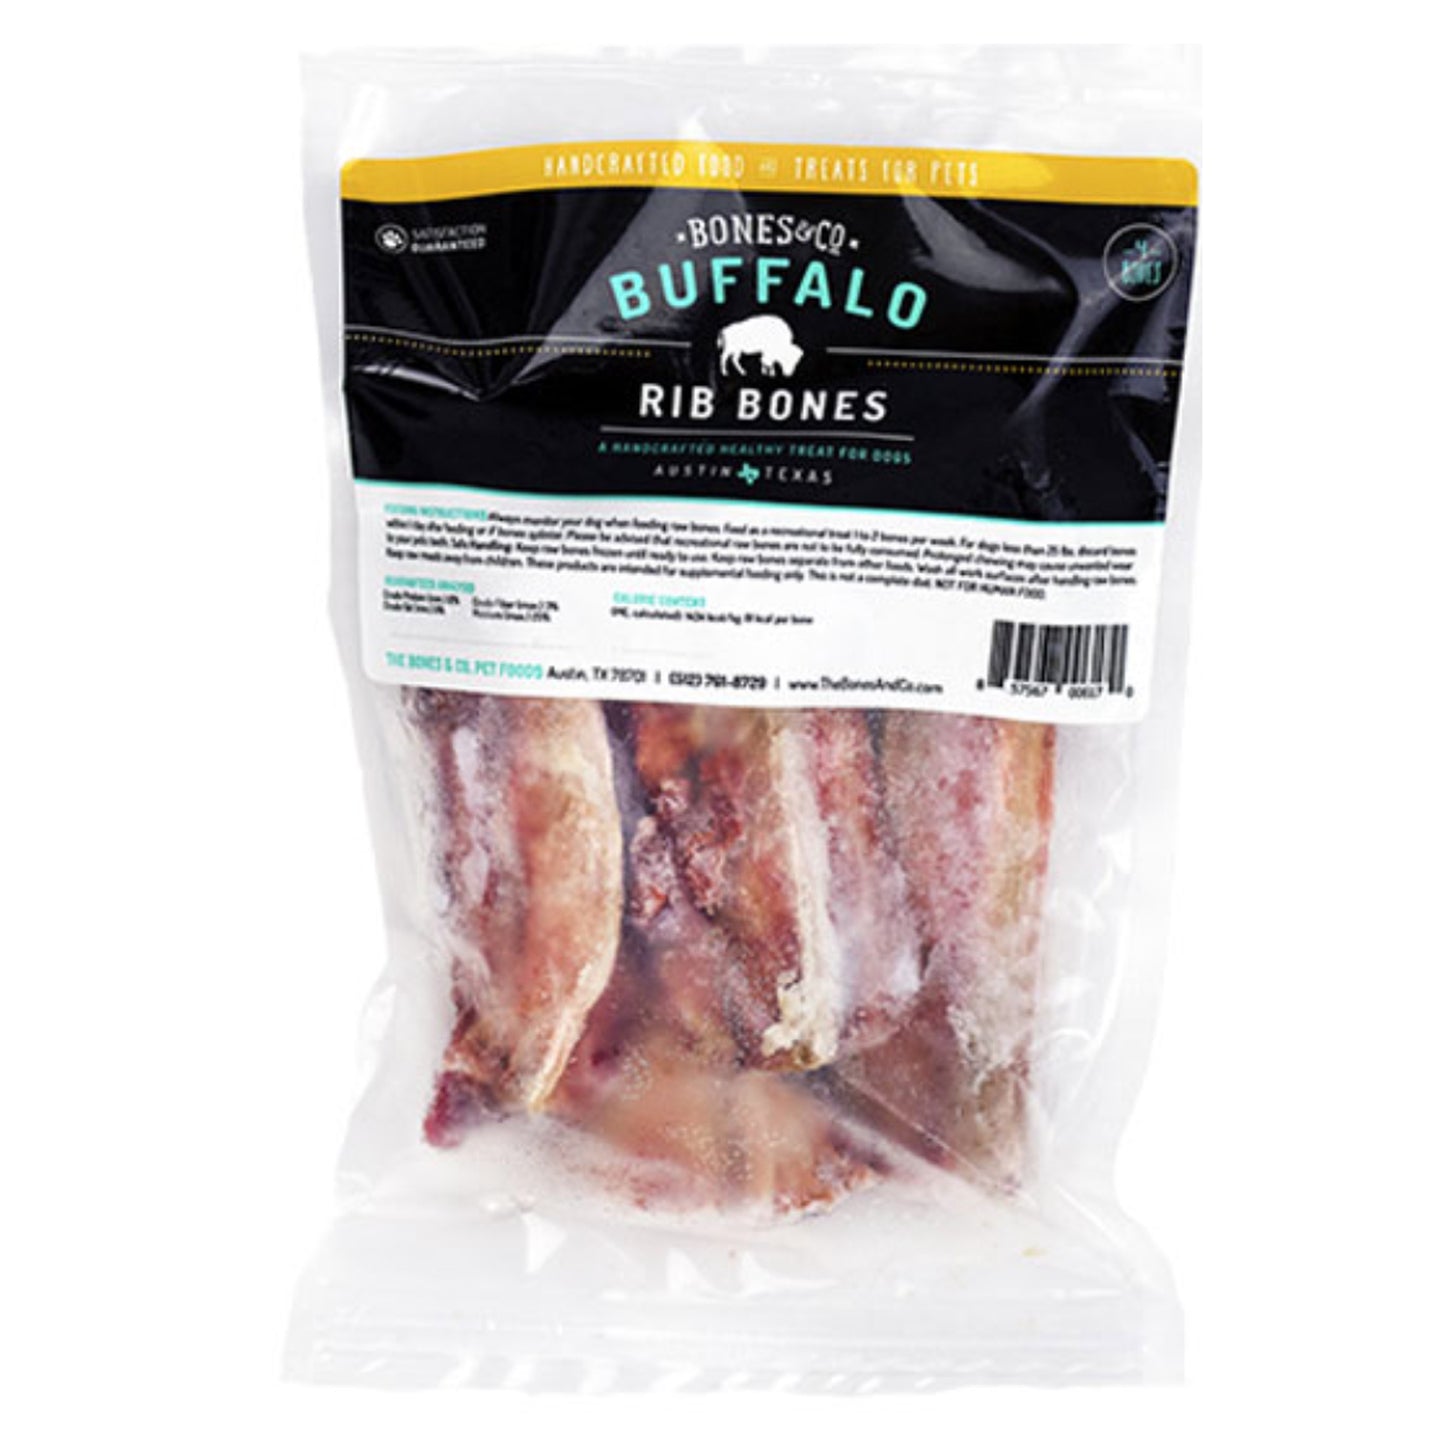 Bones & Co. Buffalo Rib Bones 4 Pack *For Local Pick Up Only